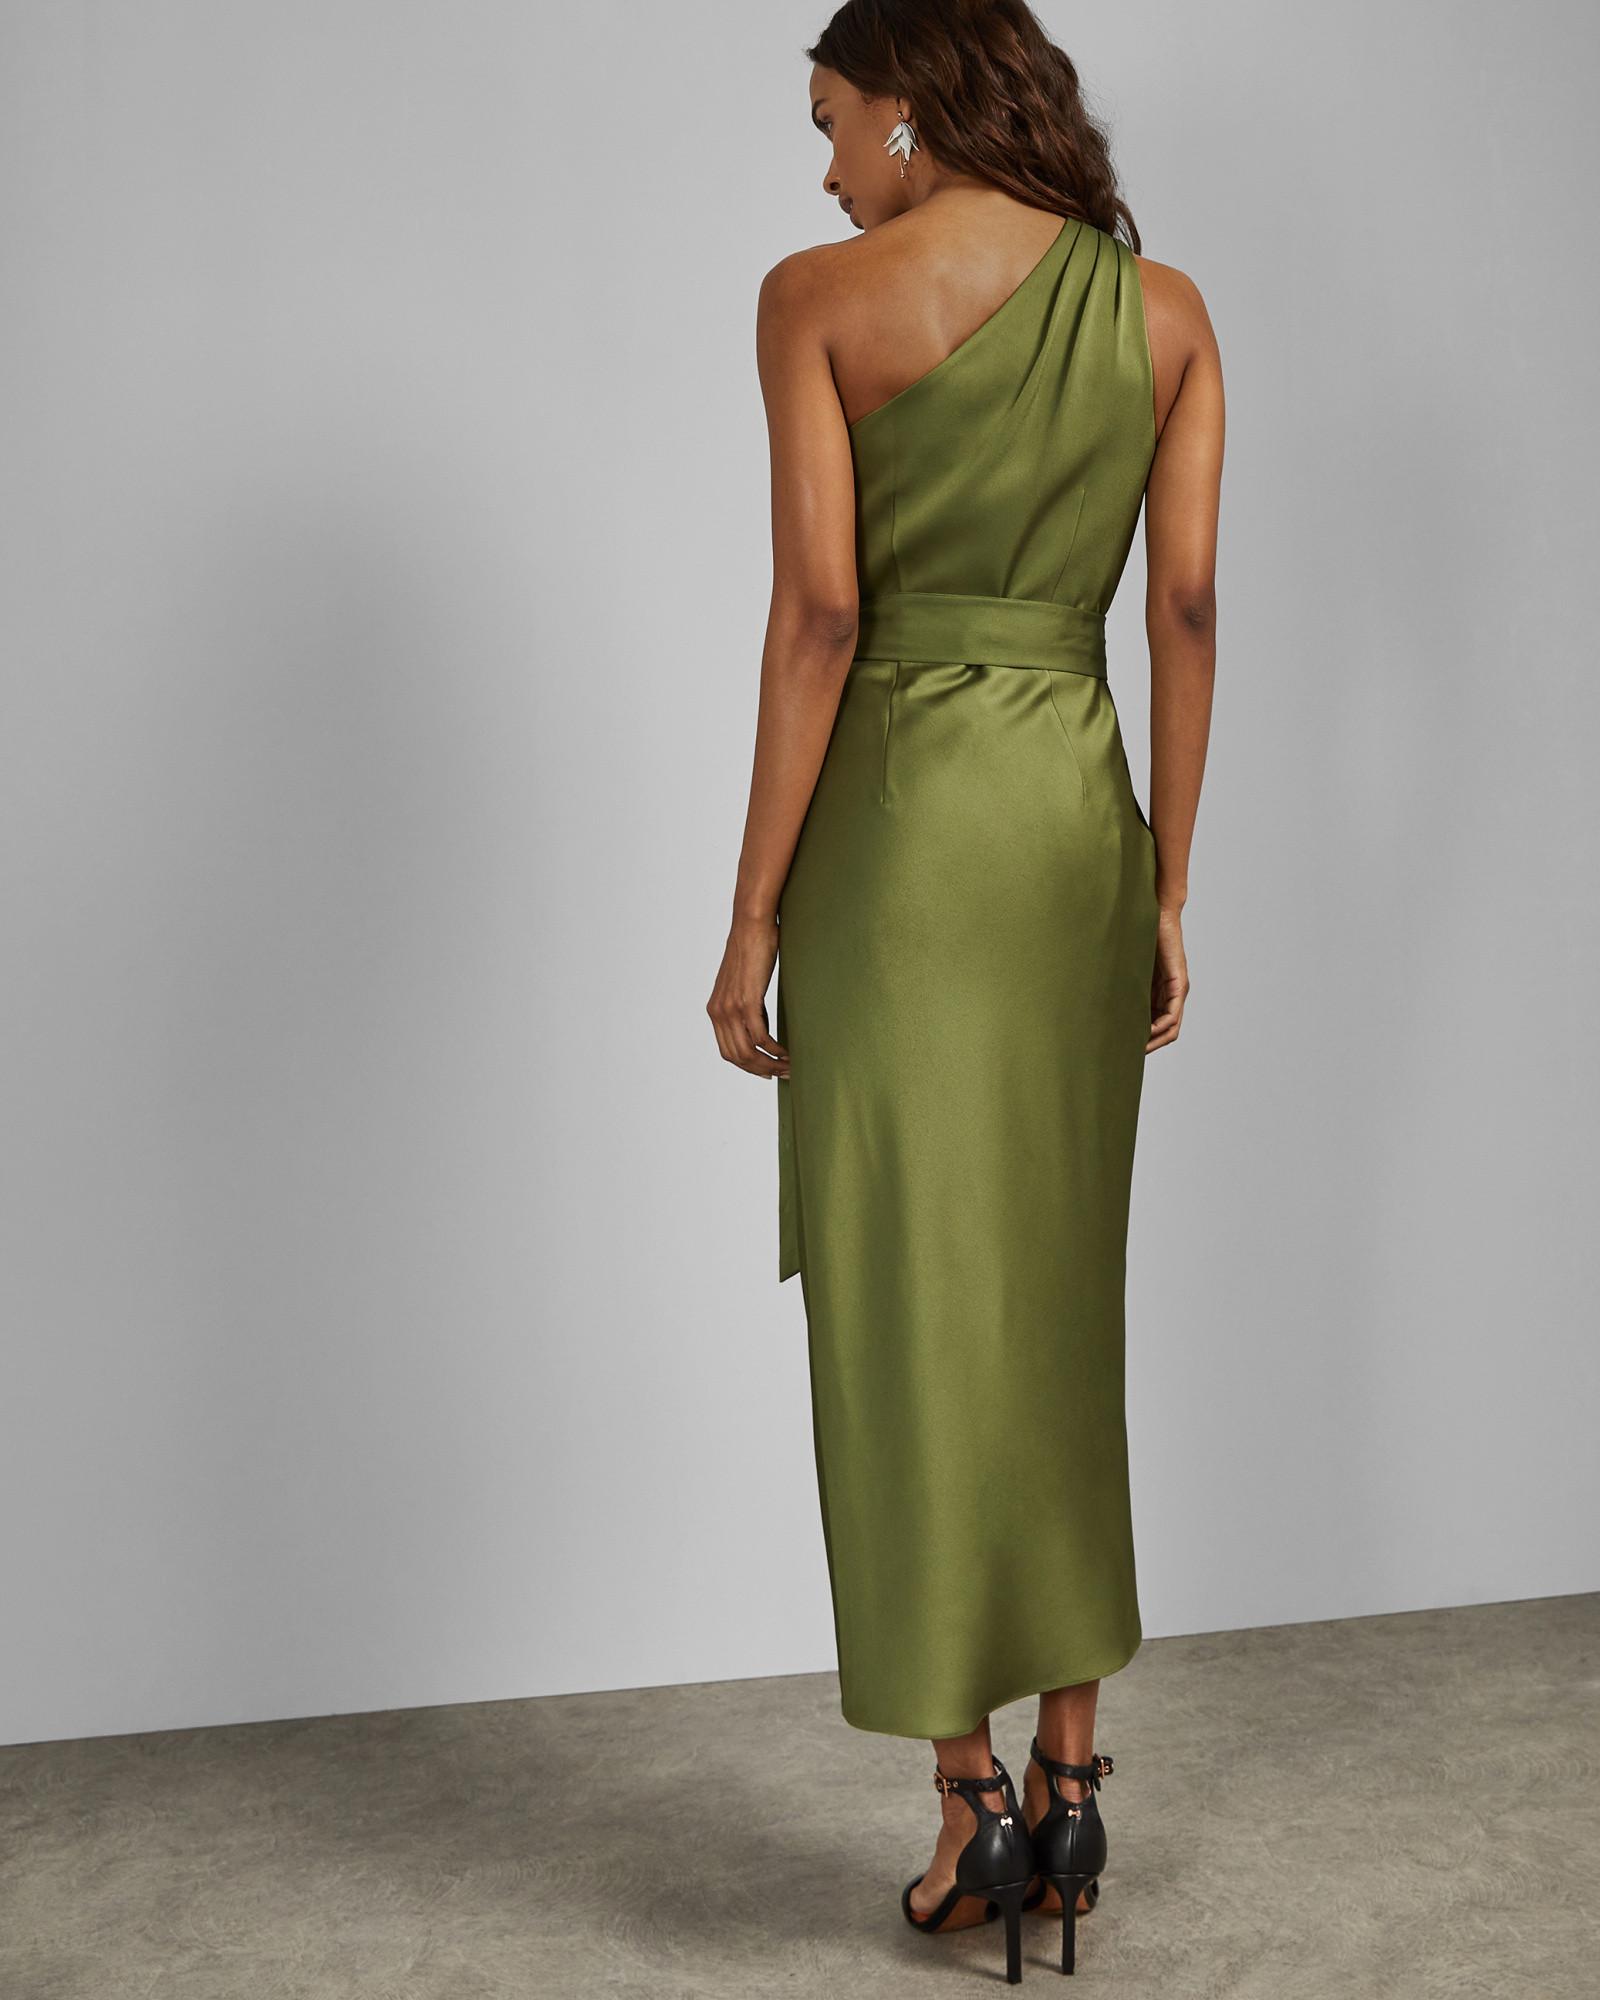 Ted Baker Synthetic One Shoulder Drape Midi Dress in Green - Lyst